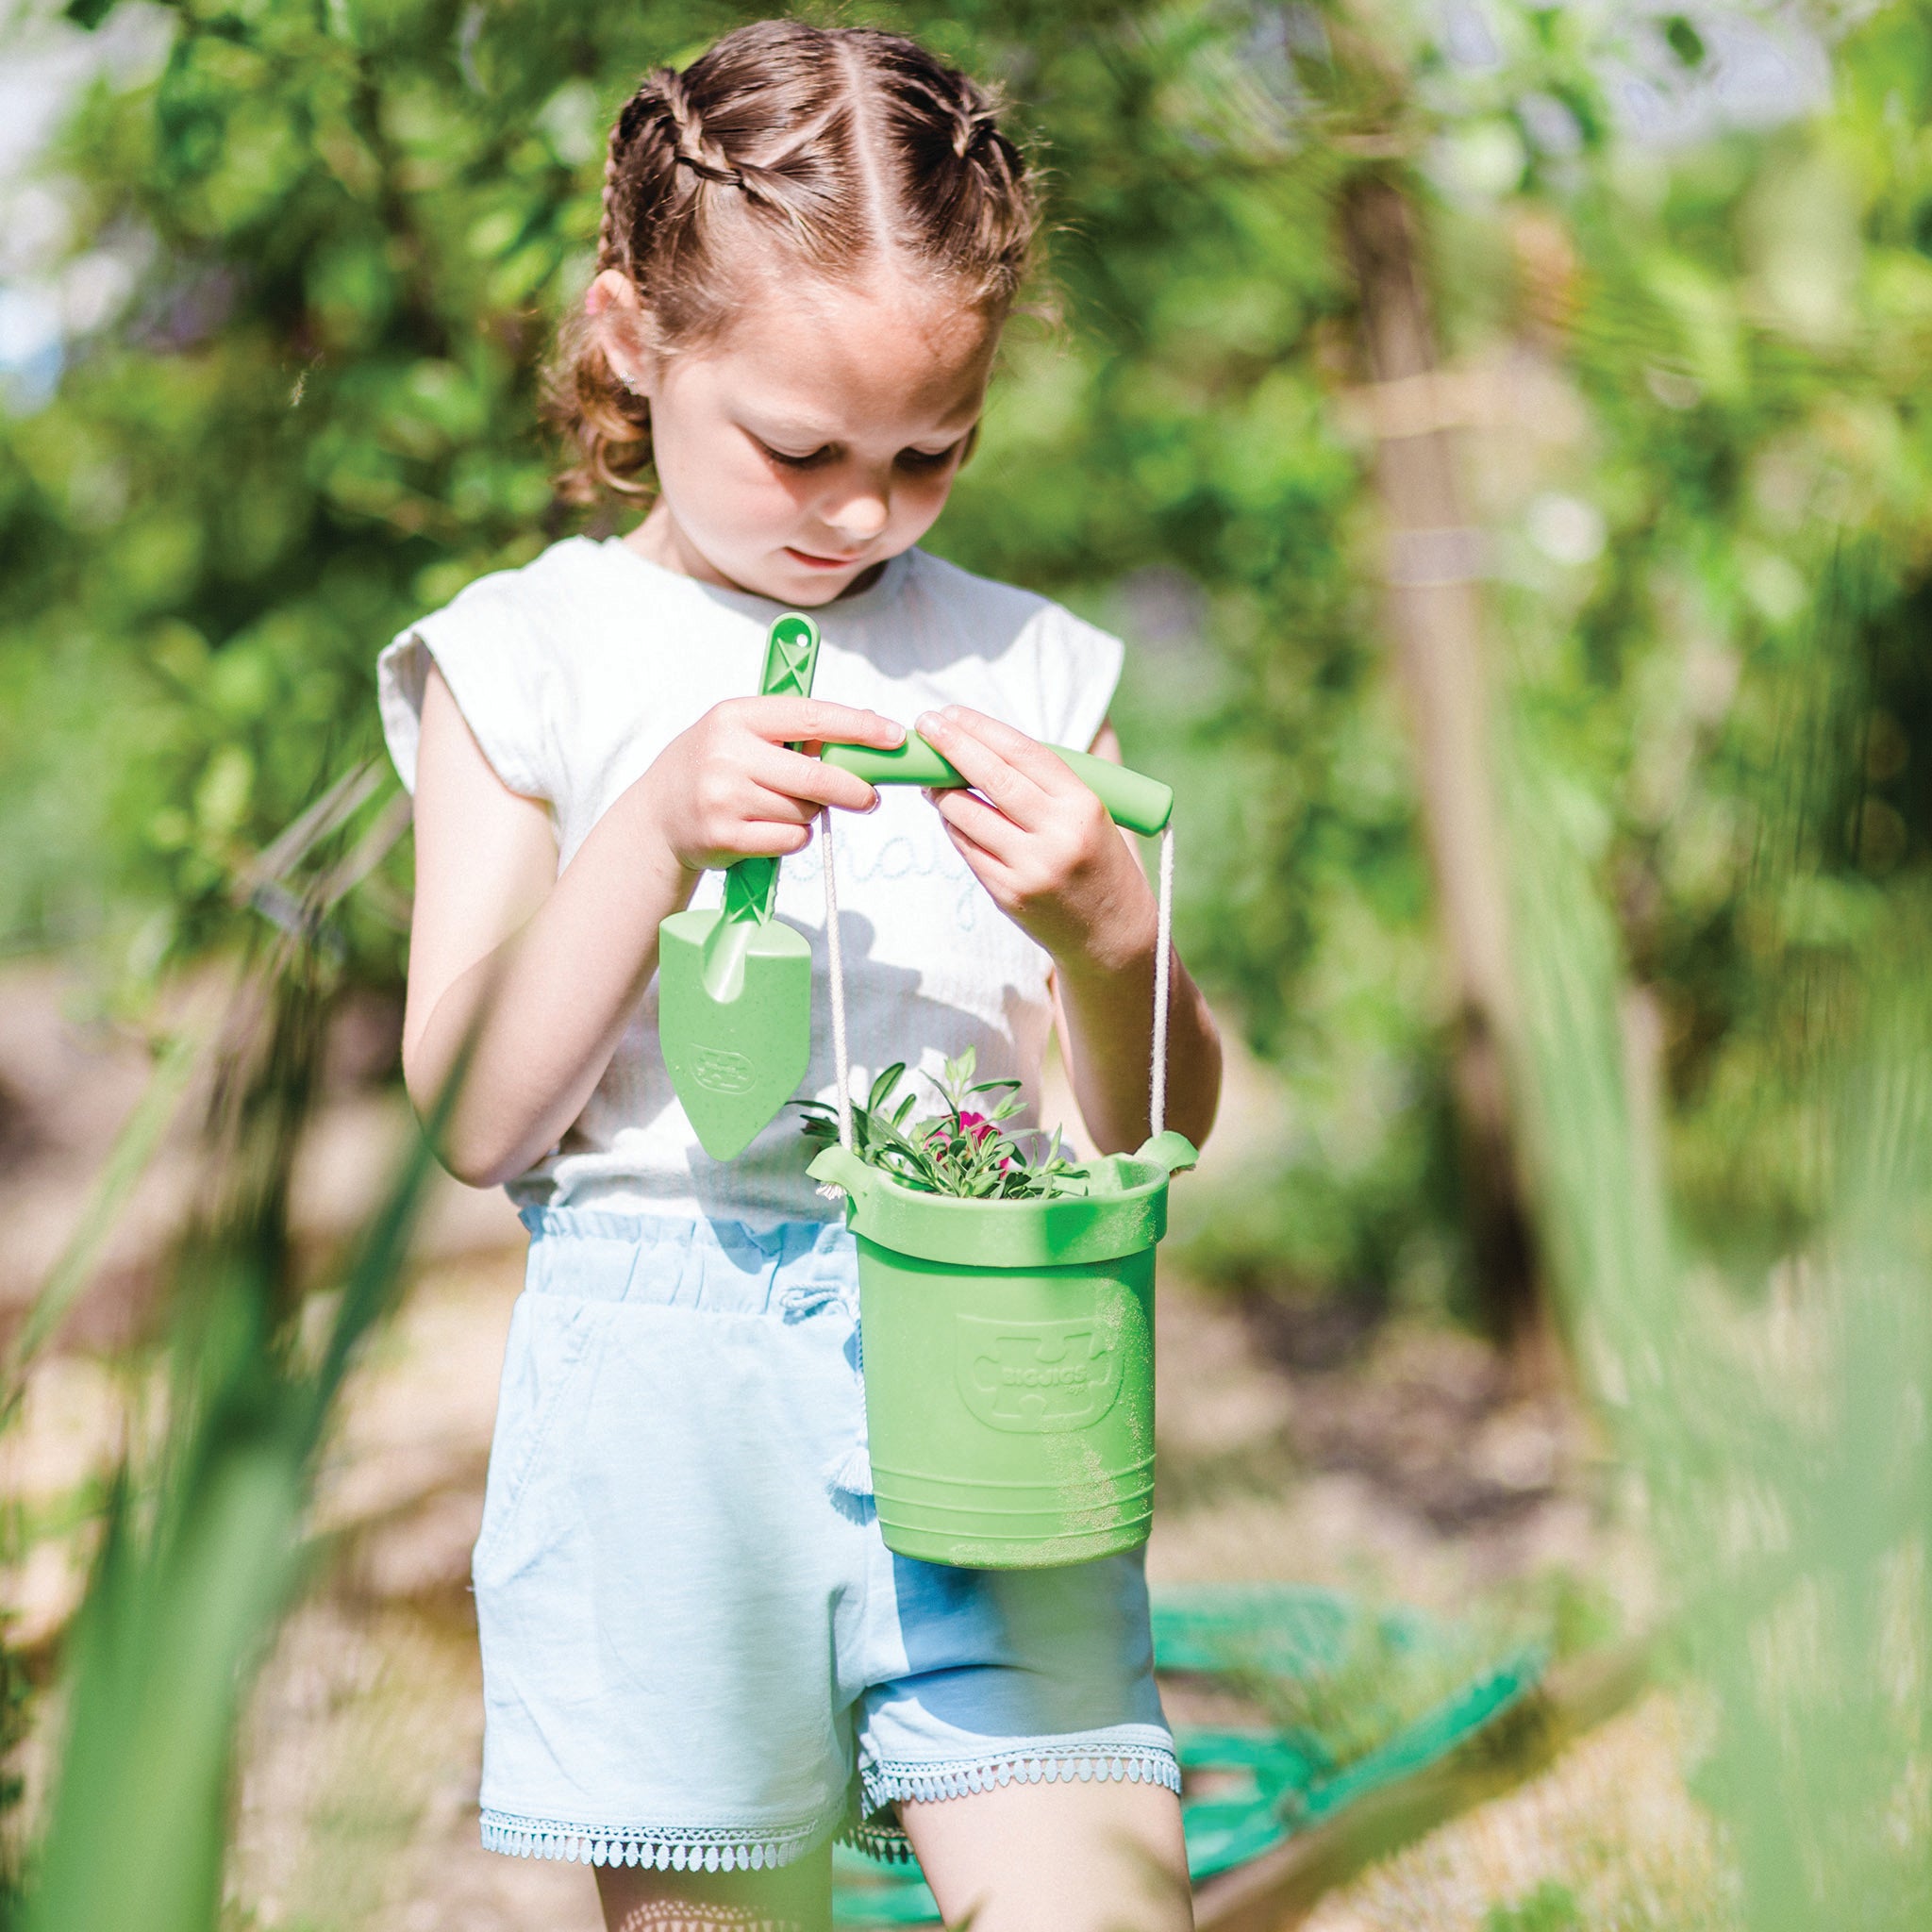 Girl with plastic free bucket and spade